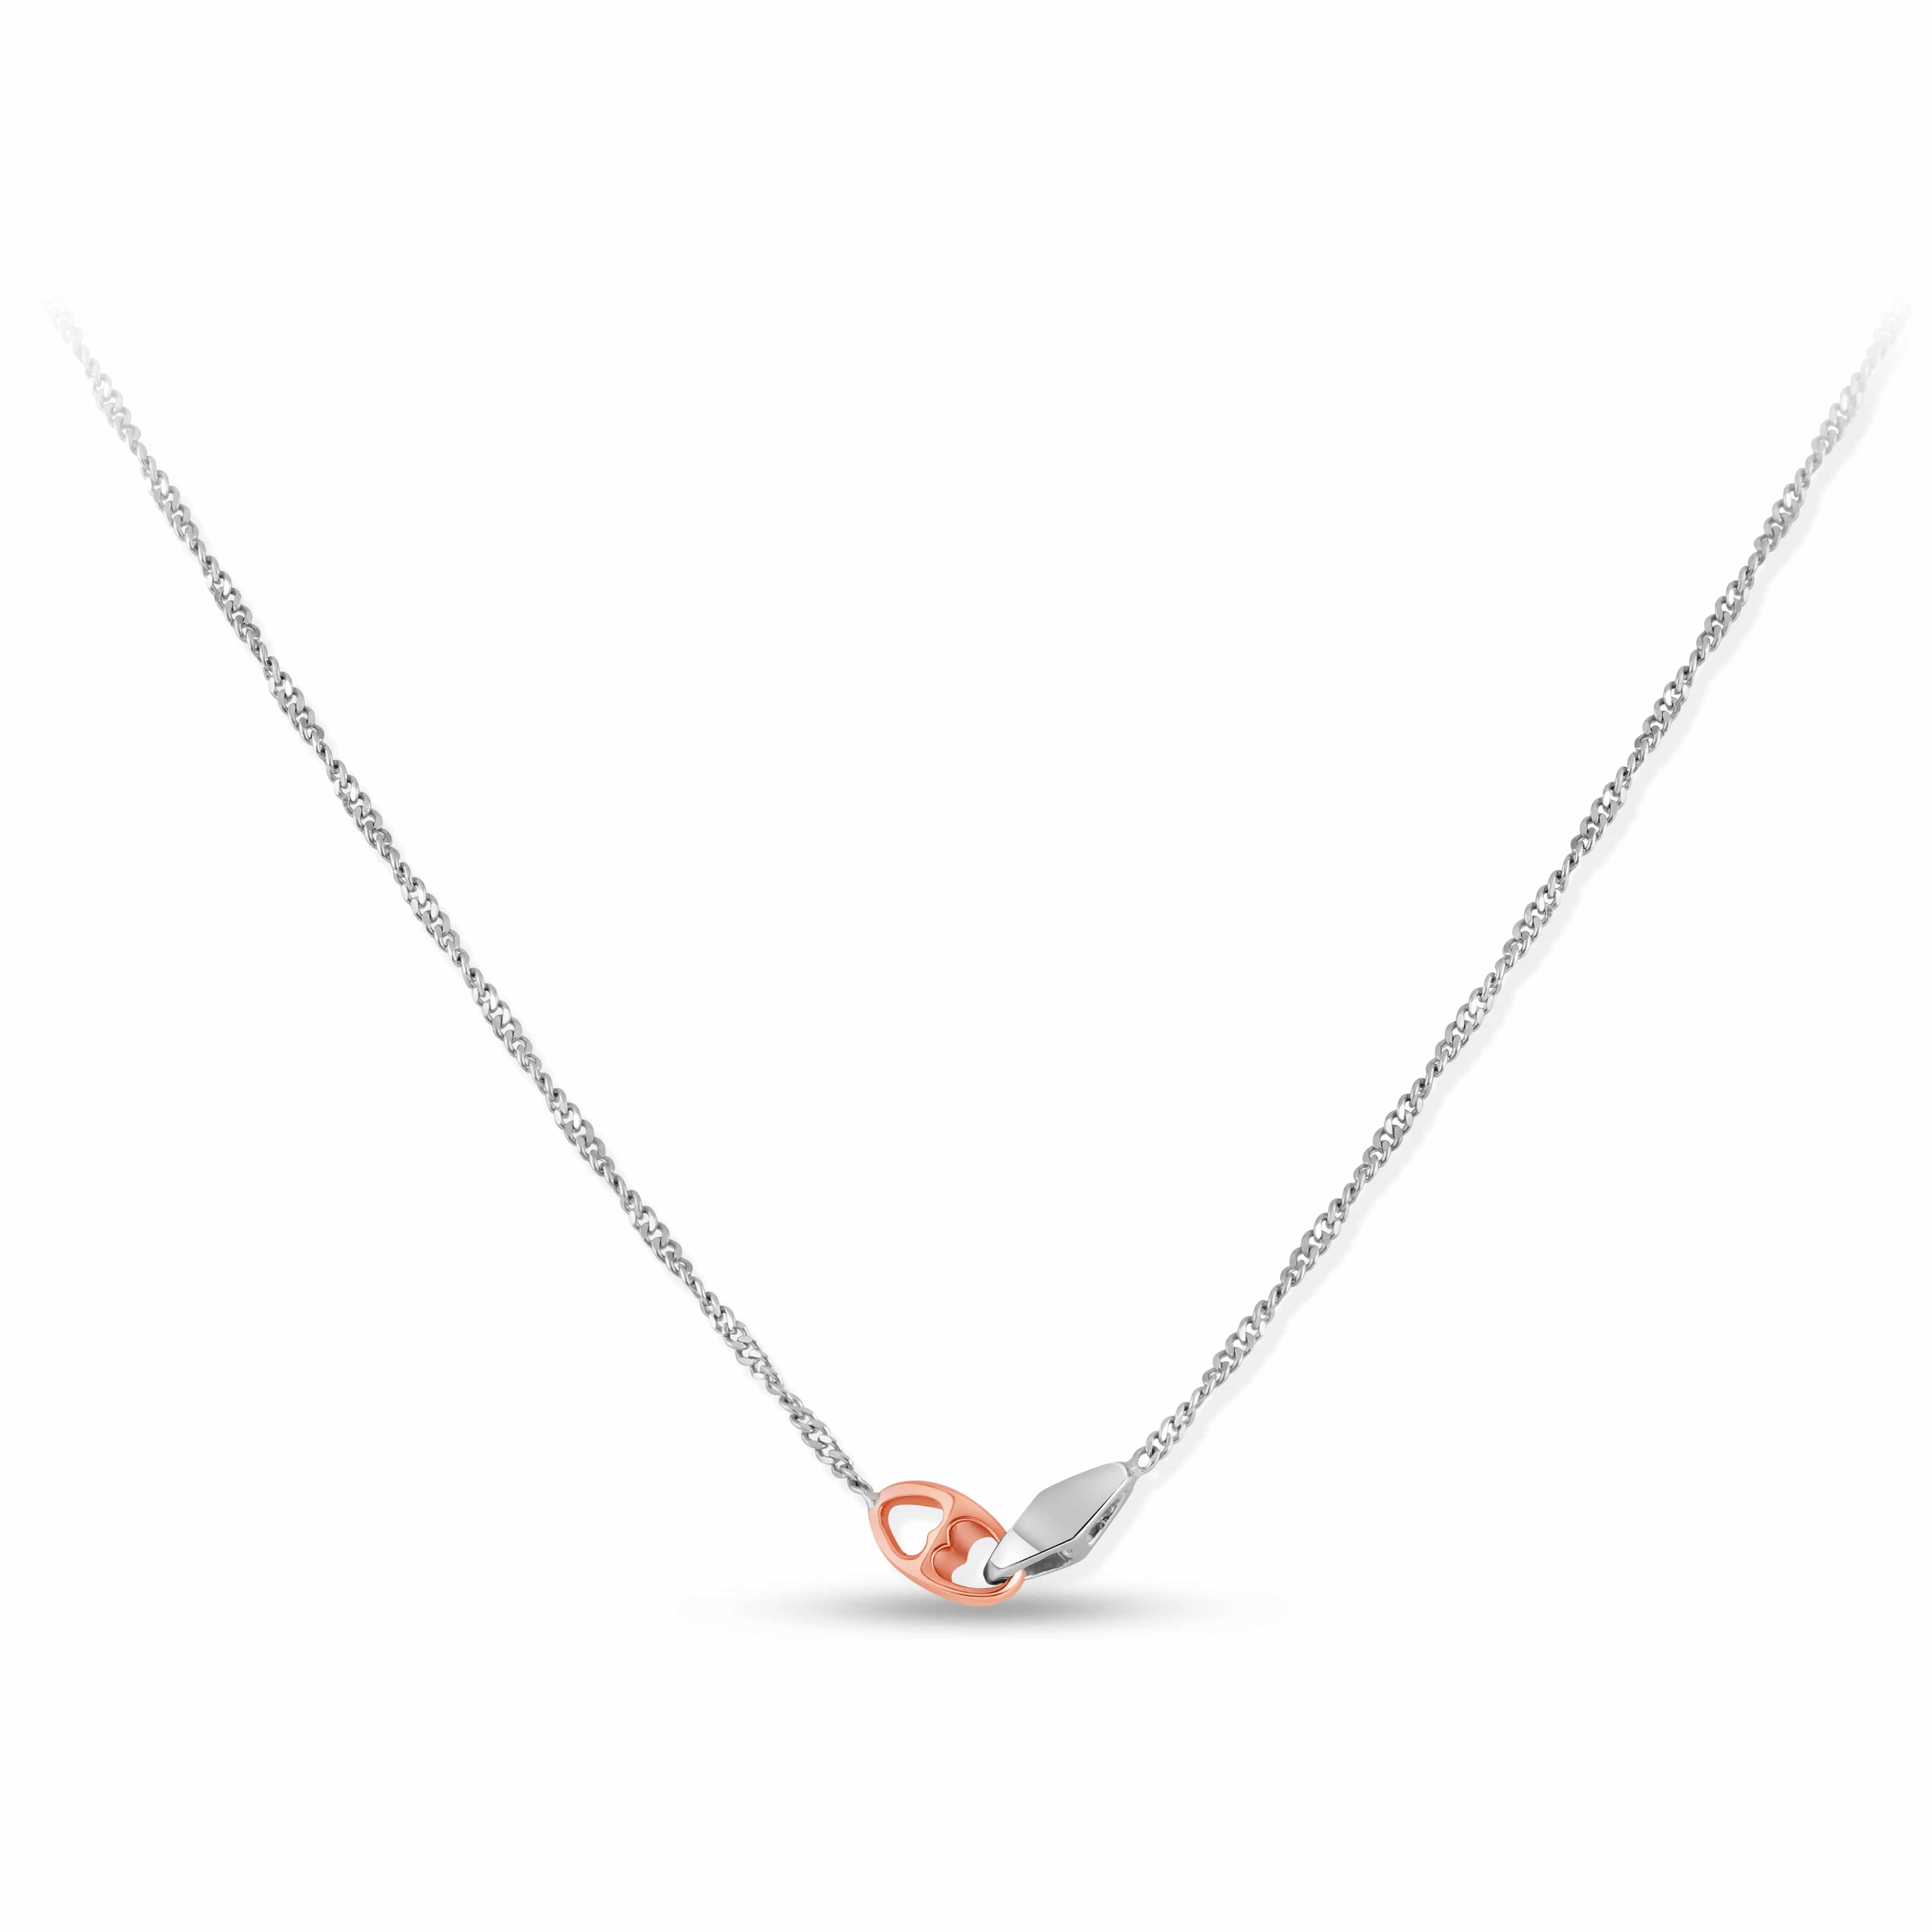 Heart and Circle Diamond Necklace | Radiant Bay